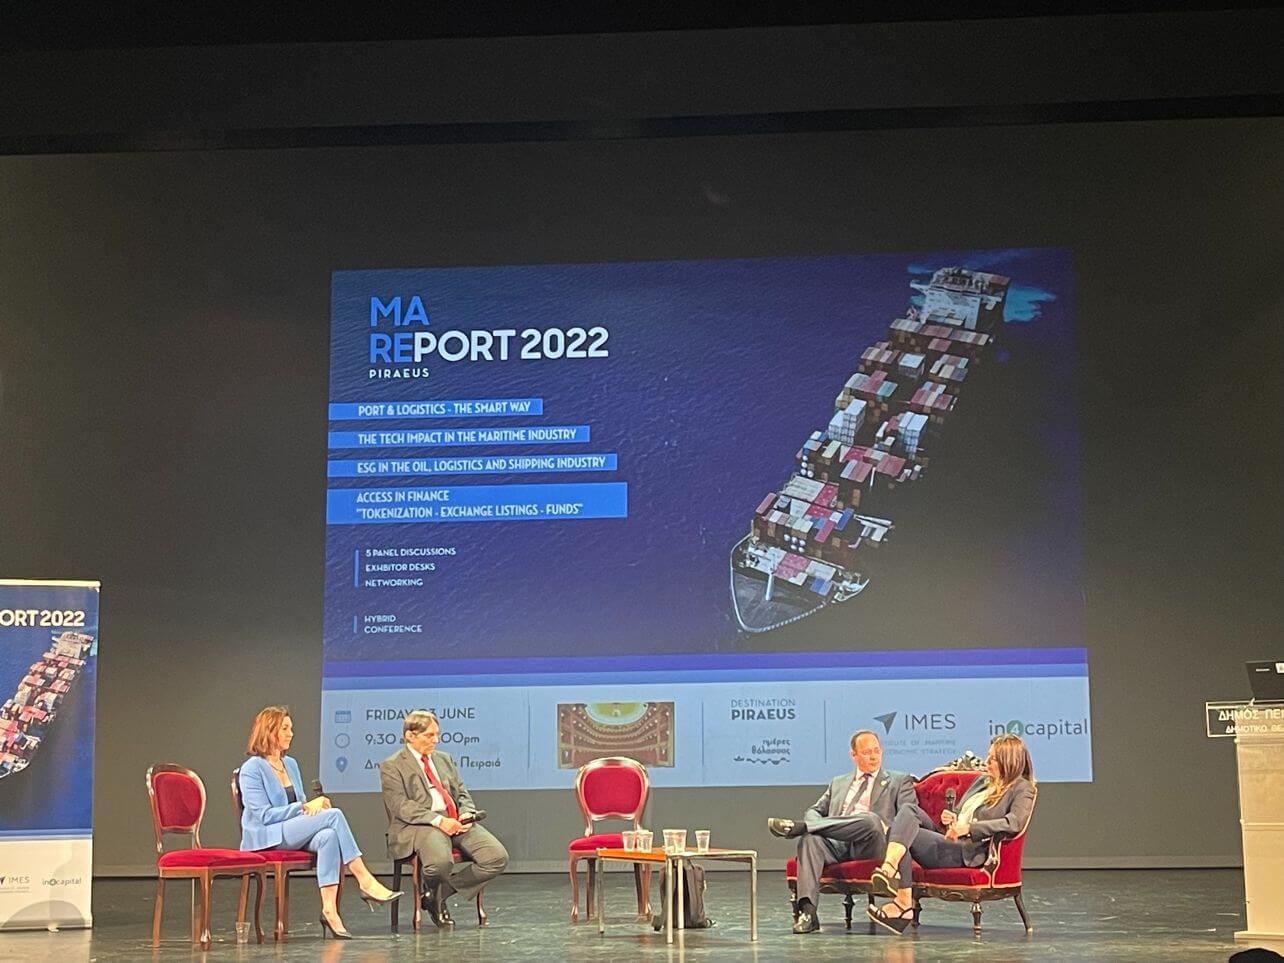 Margetis’ Maritime Vice President, Mrs Angeliki Chomata - Margetis, attended as a speaker at the 4th session of #MarePort2022, “ESG in Oil, Logistics and Shipping Industry”.